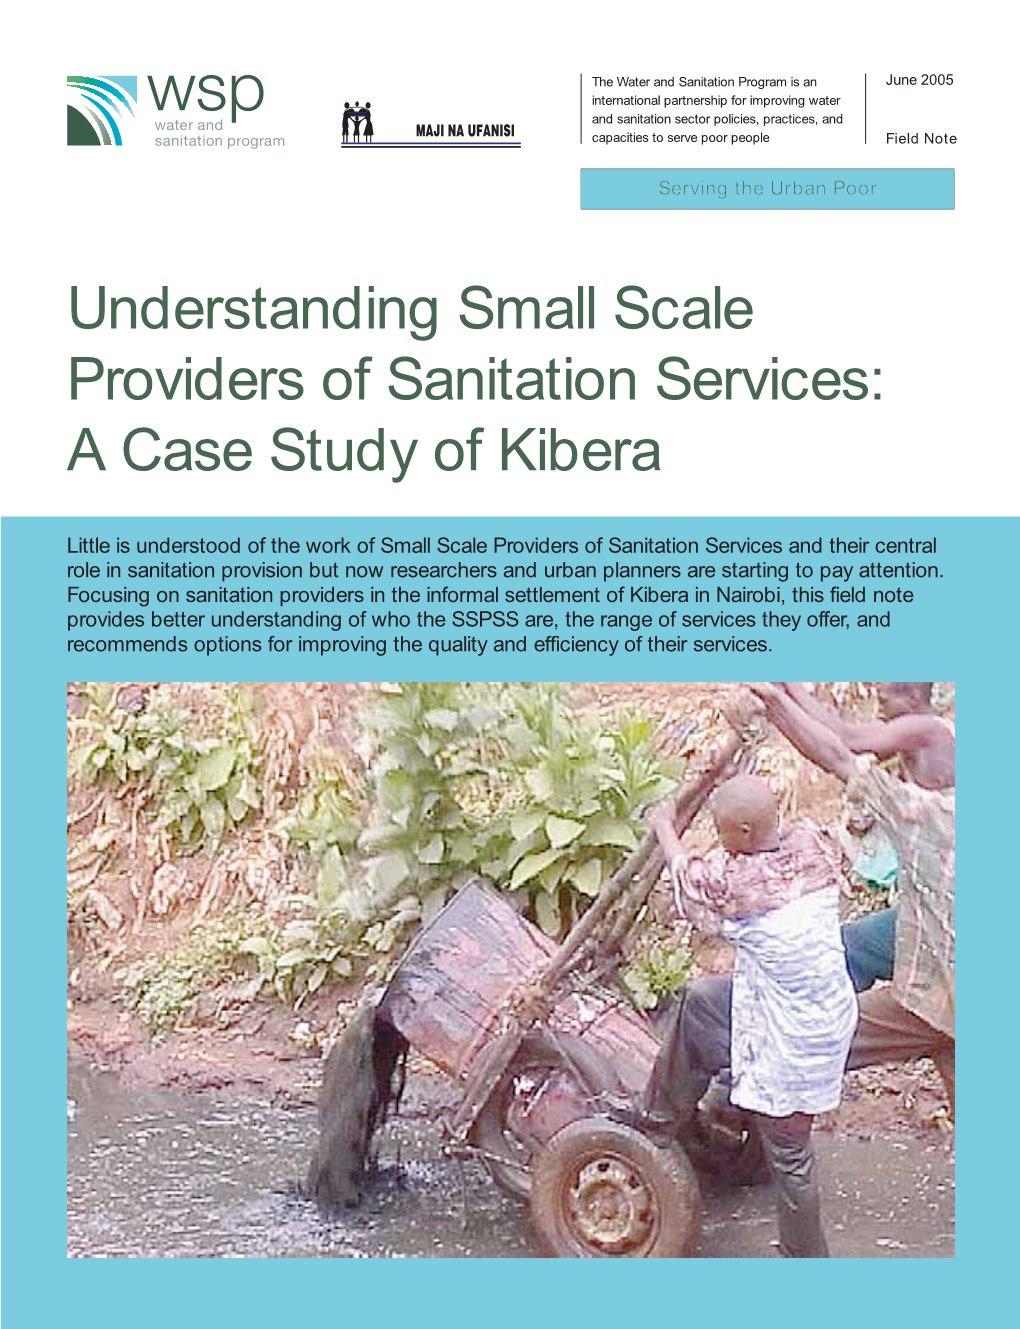 Understanding Small Scale Providers of Sanitation Services: a Case Study of Kibera